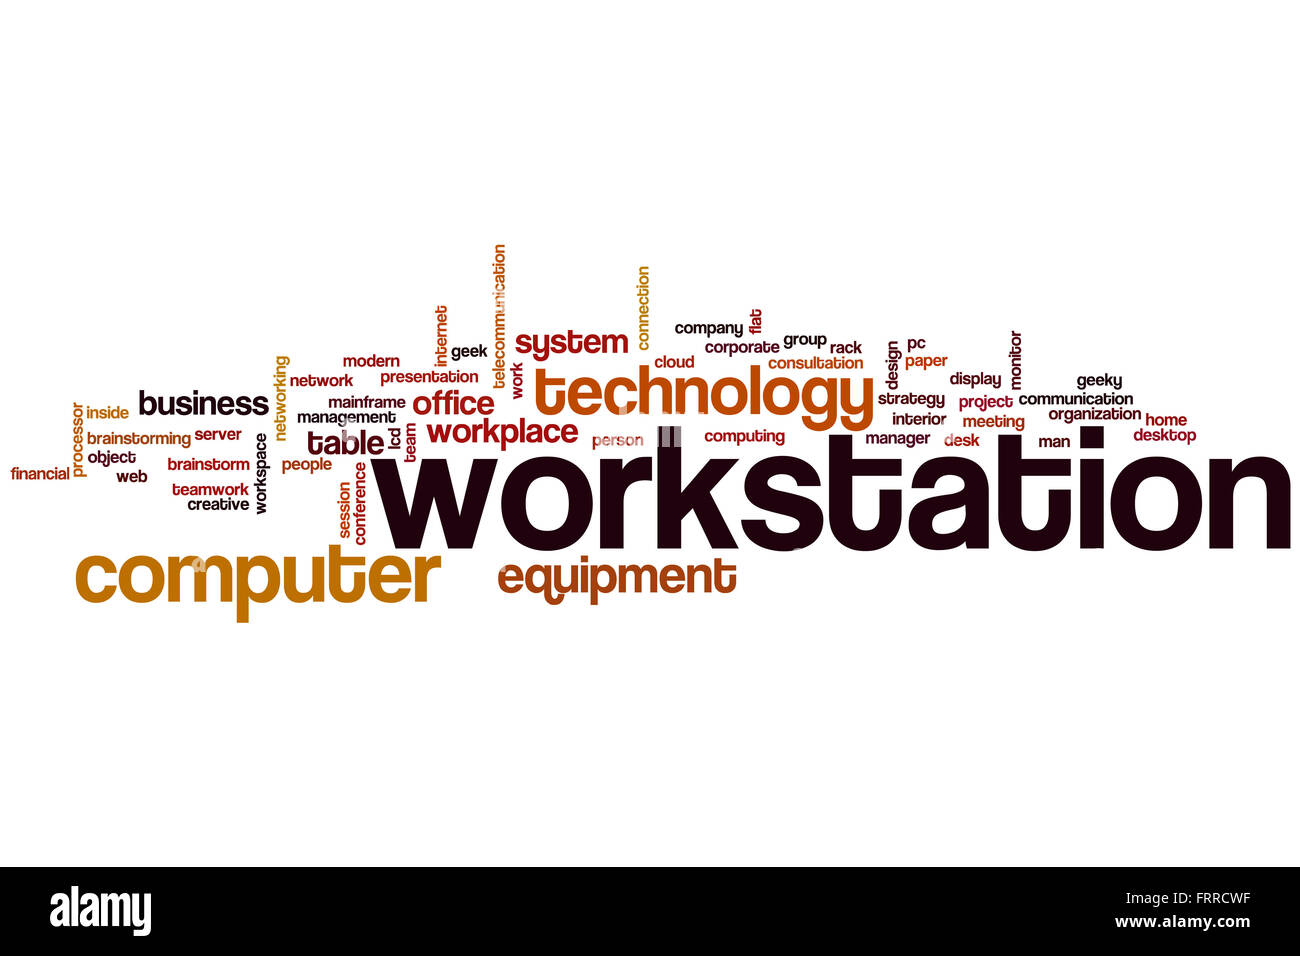 Workstation word cloud concept with computer equipment related tags Stock Photo